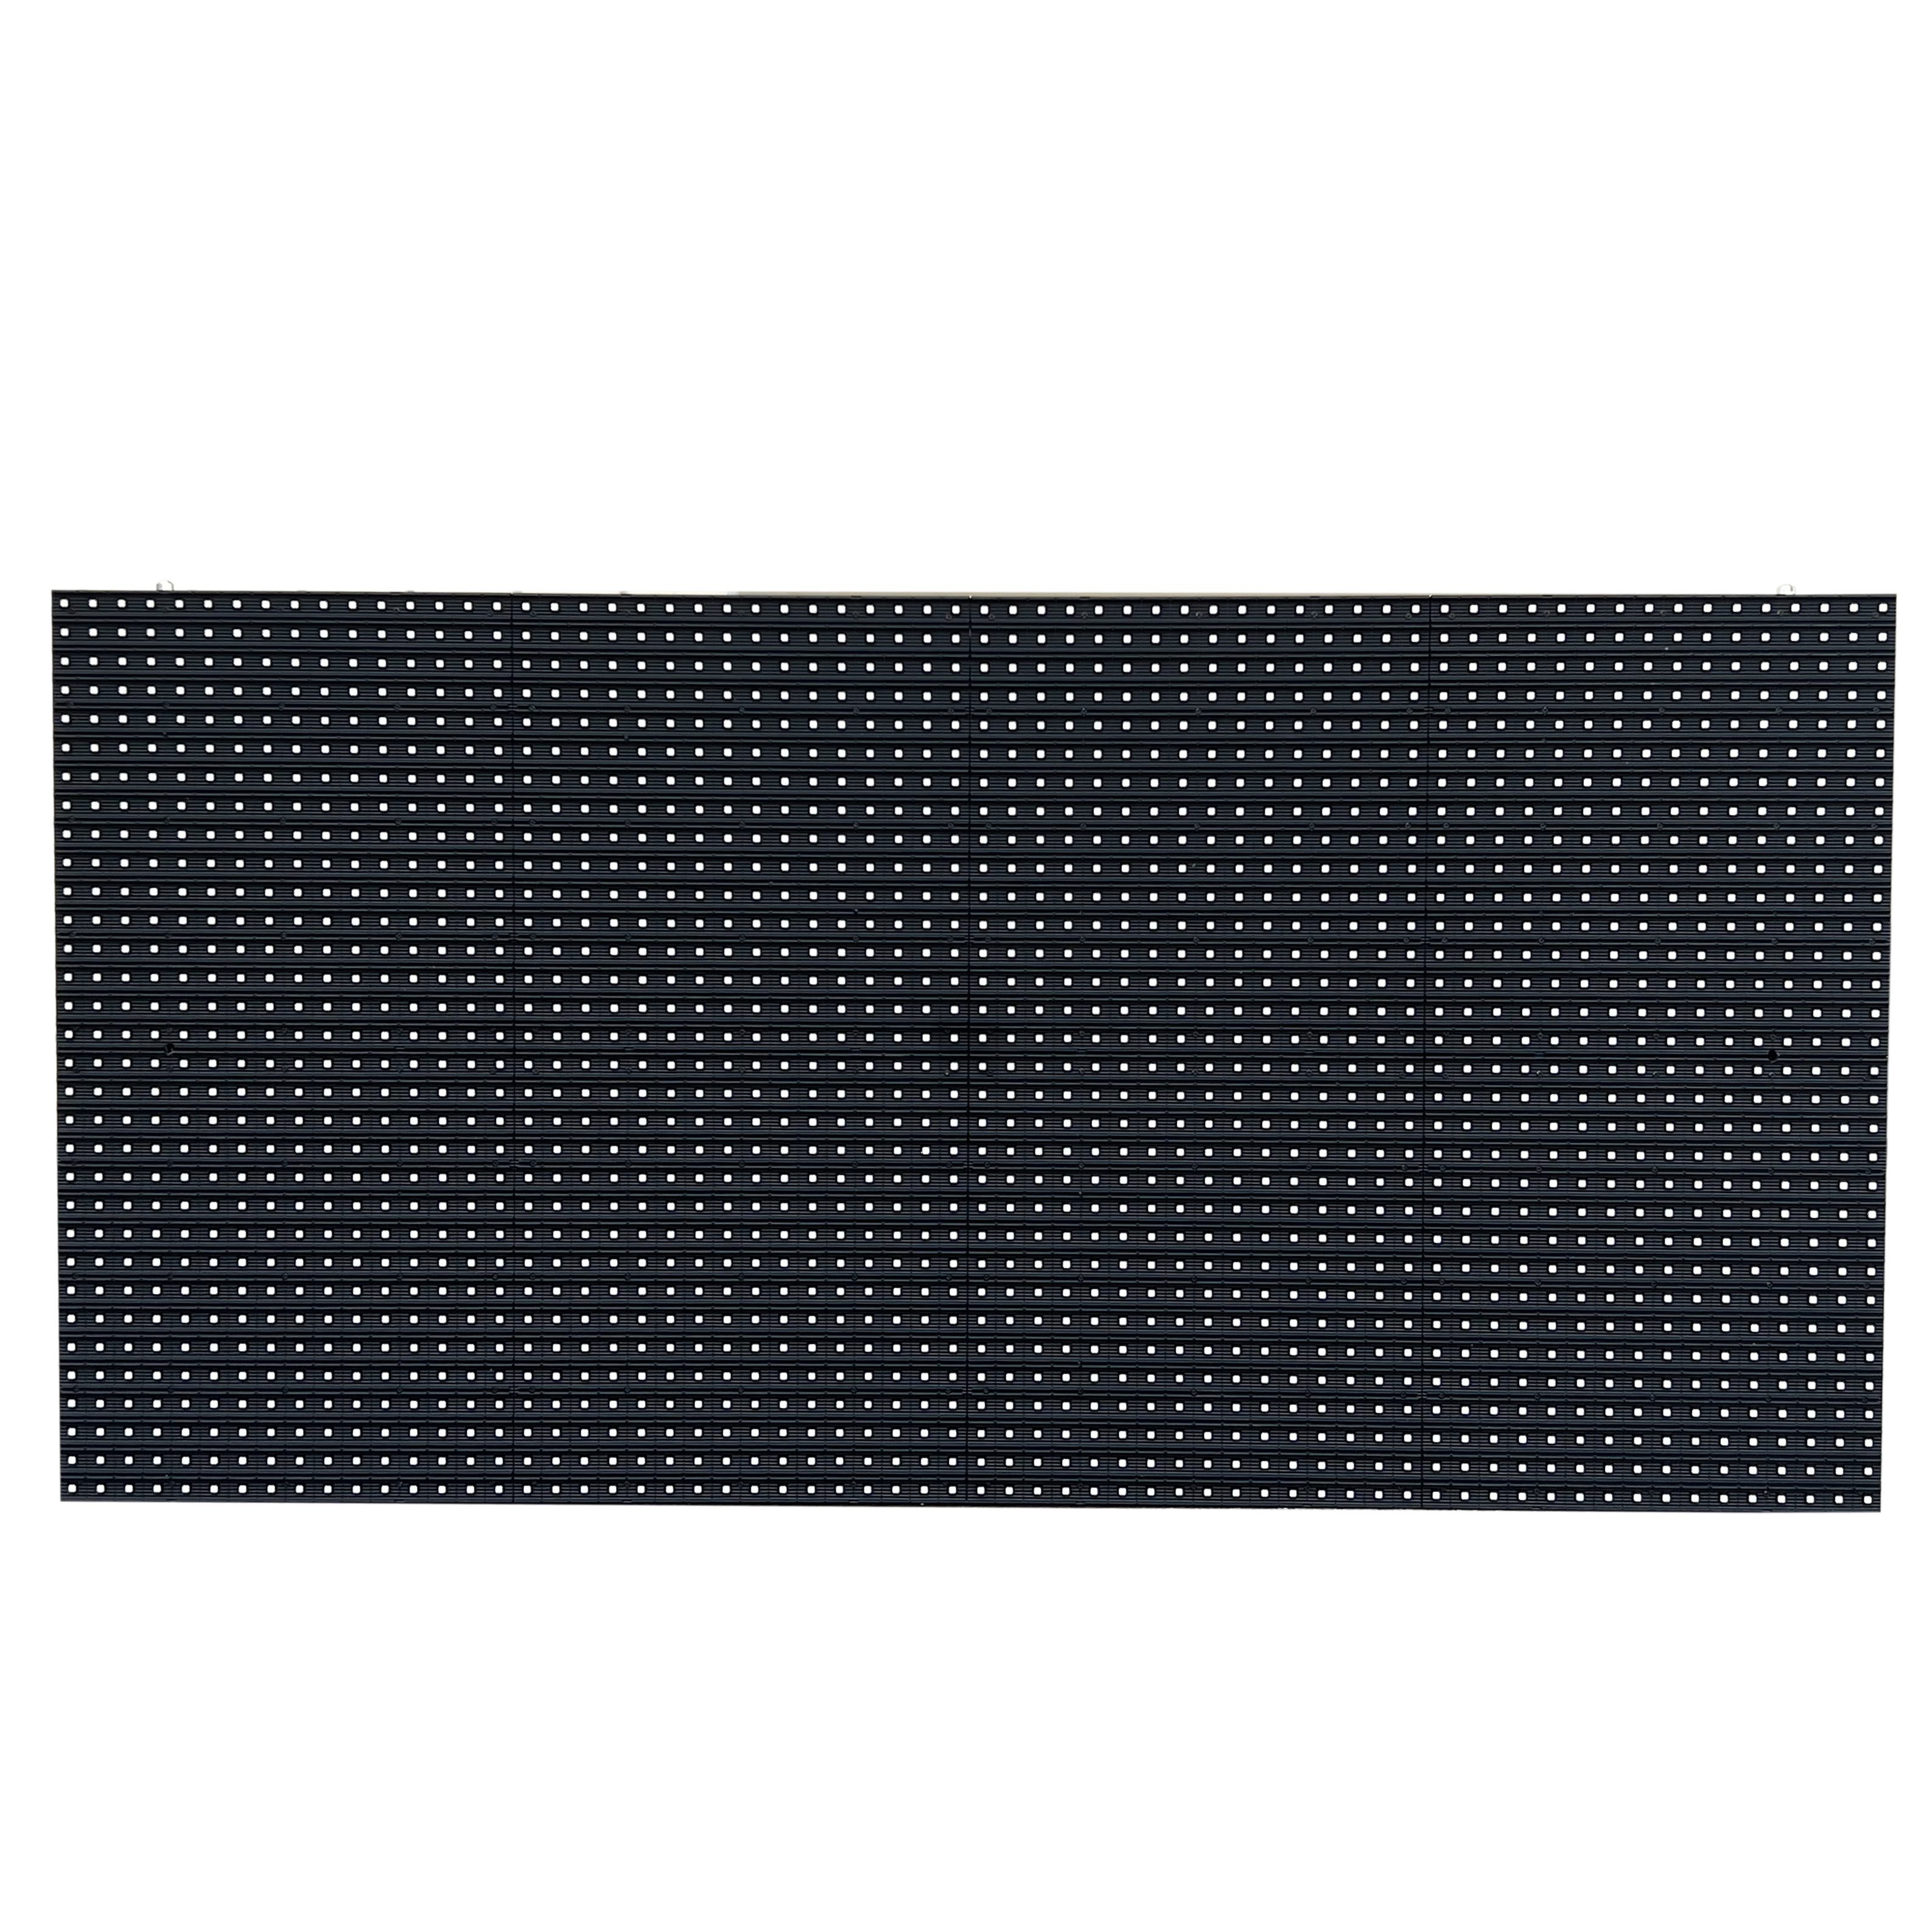 Outdoor use 7.62mm pixel pitch LED panel for churches and schools